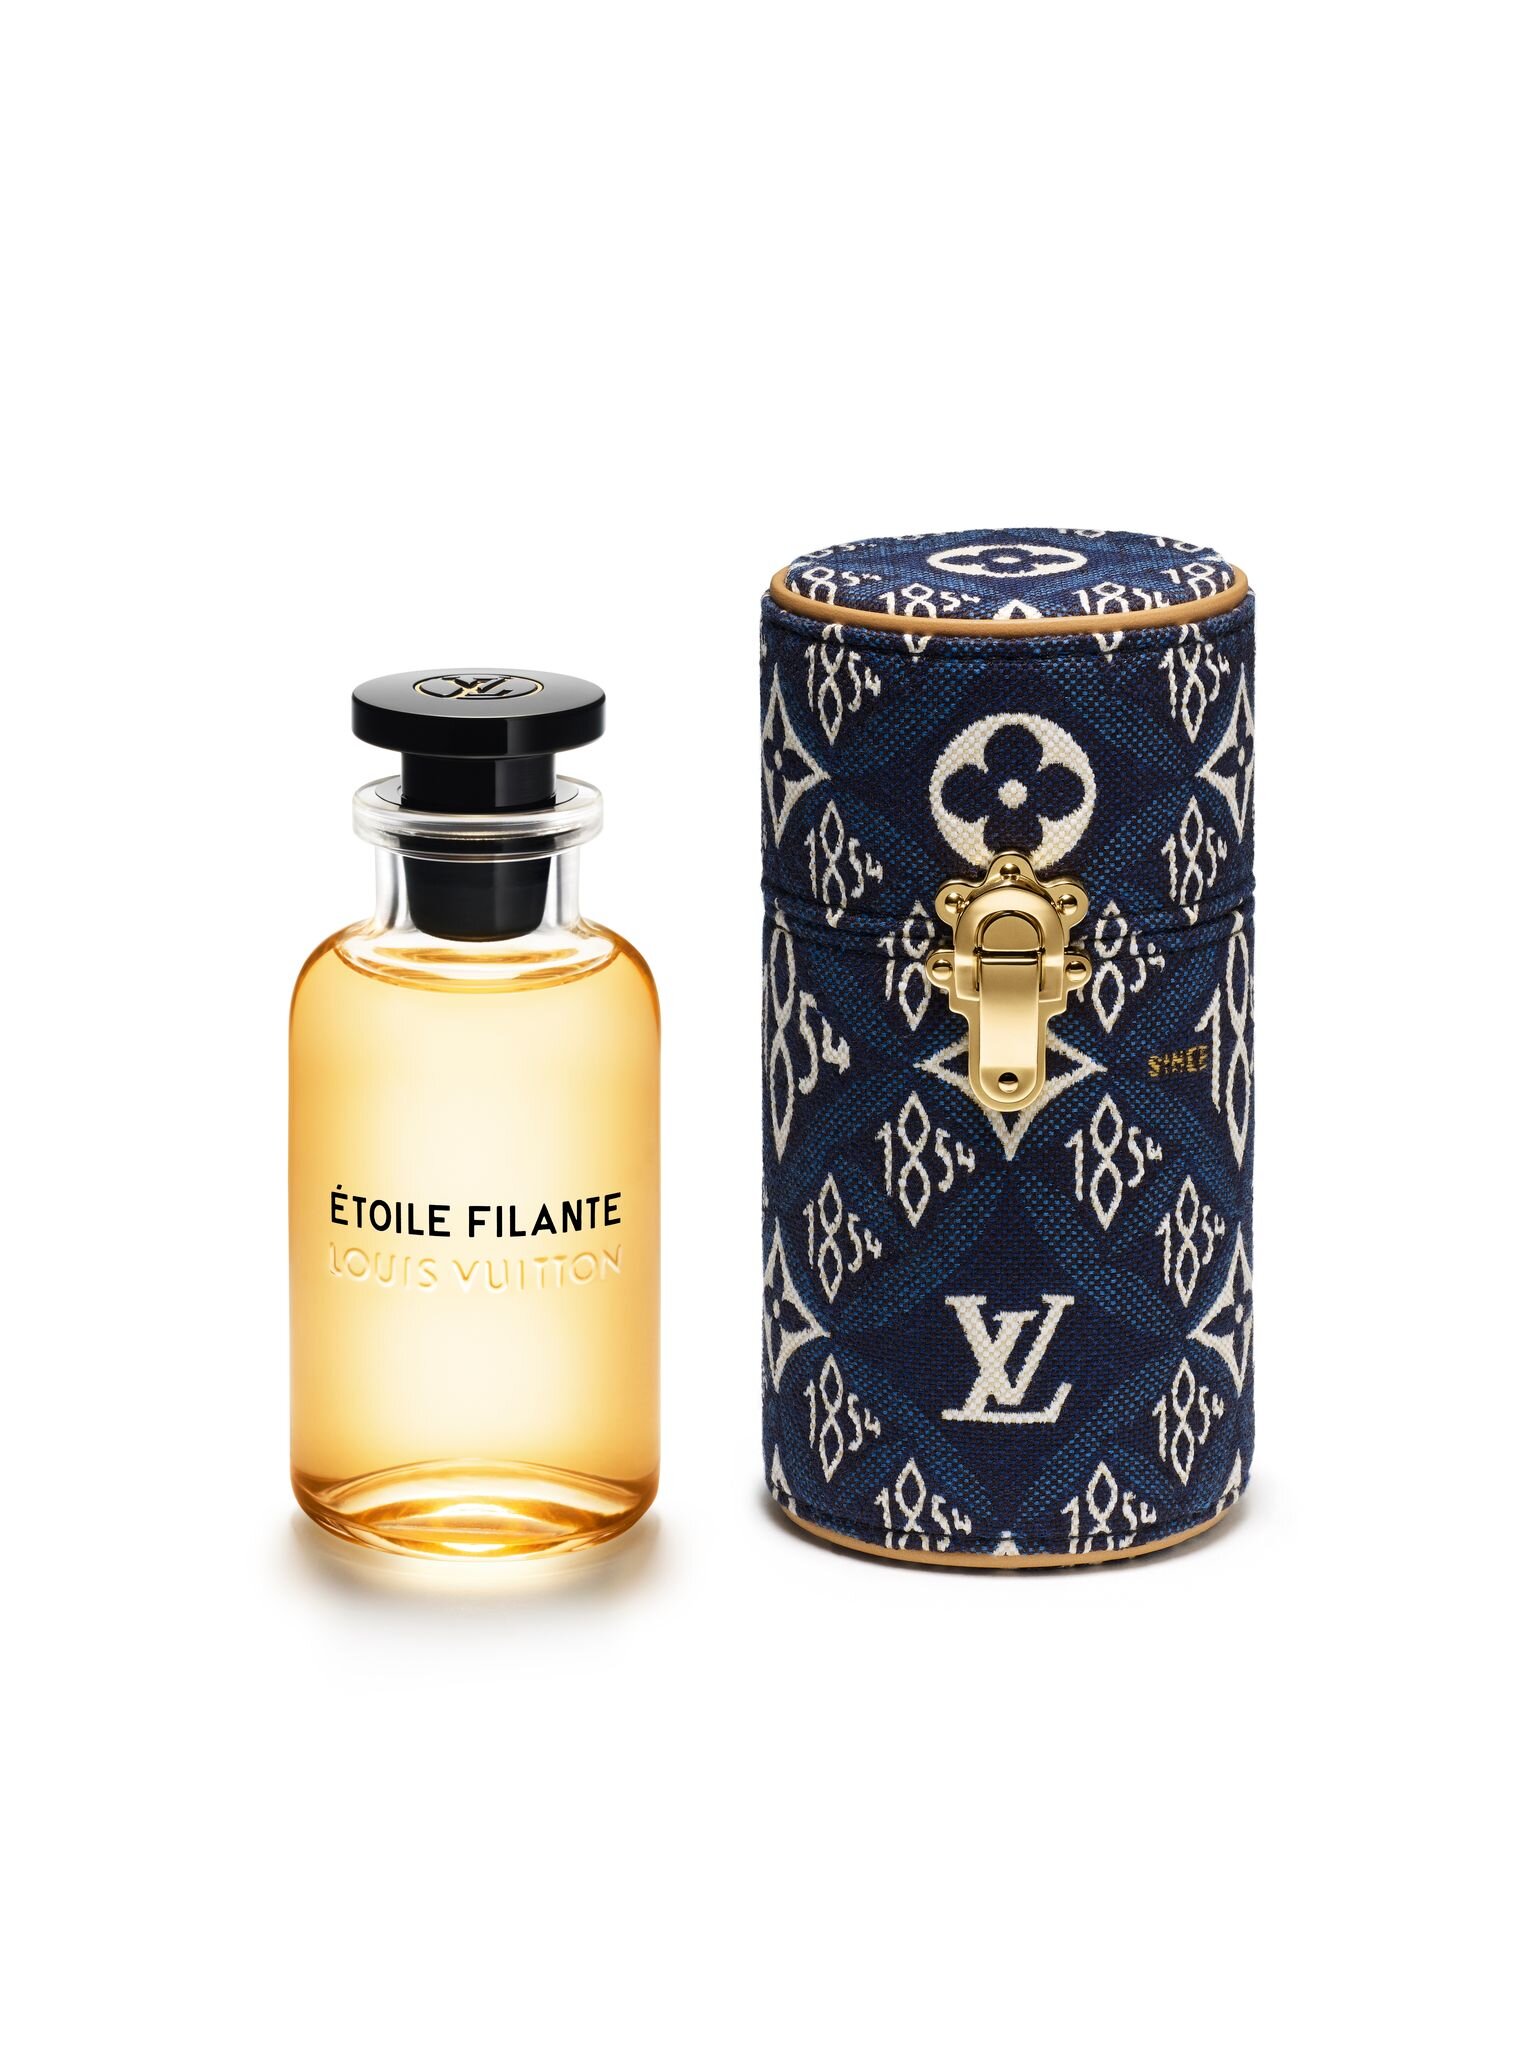 I'm obsessed! Finally found my signature smell. LV Etoile Filante : r/ Louisvuitton